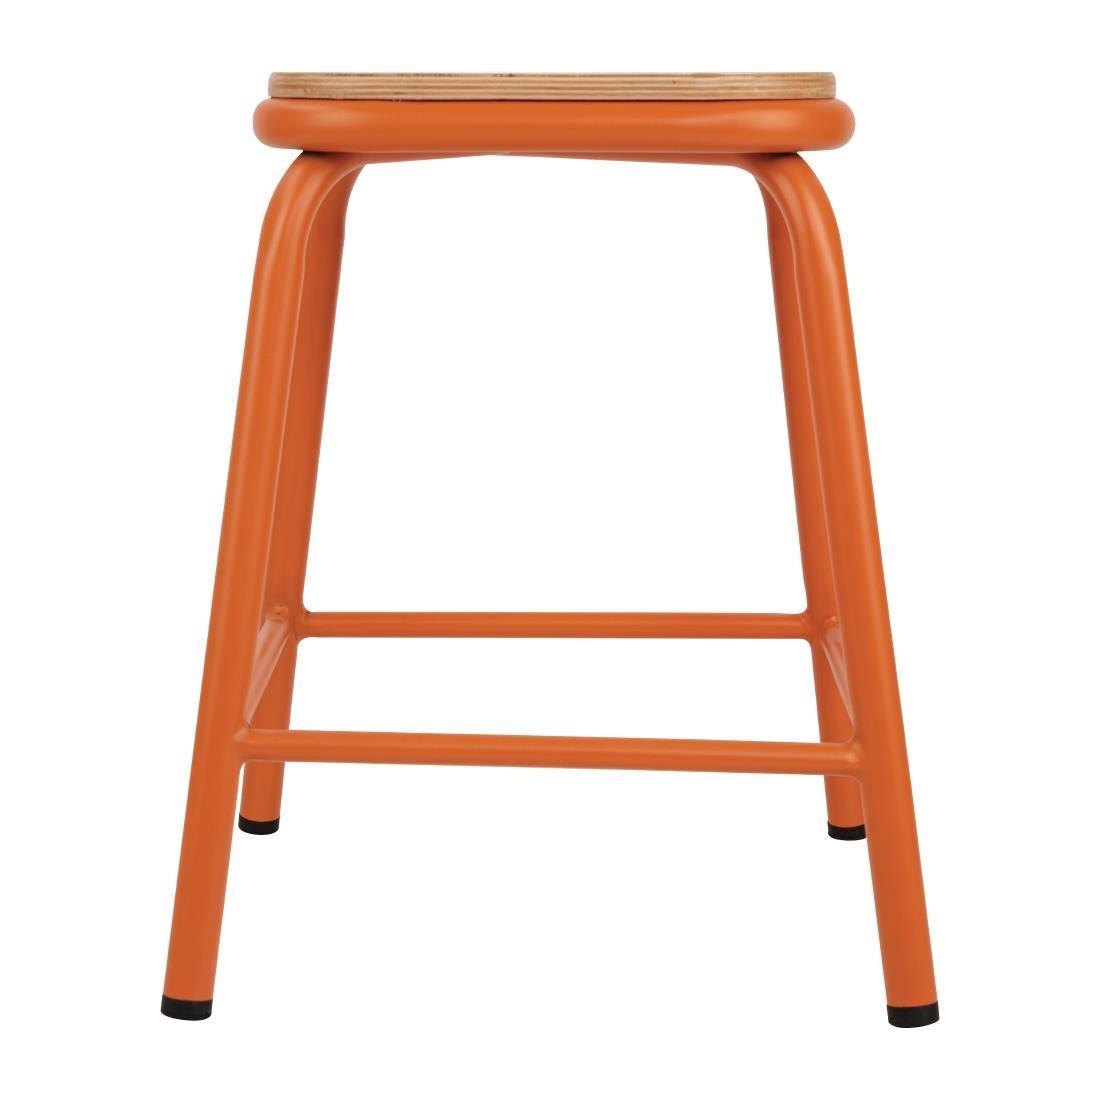 Bolero Cantina Low Stools with Wooden Seat Pad Orange (Pack of 4) - FB934  - 2